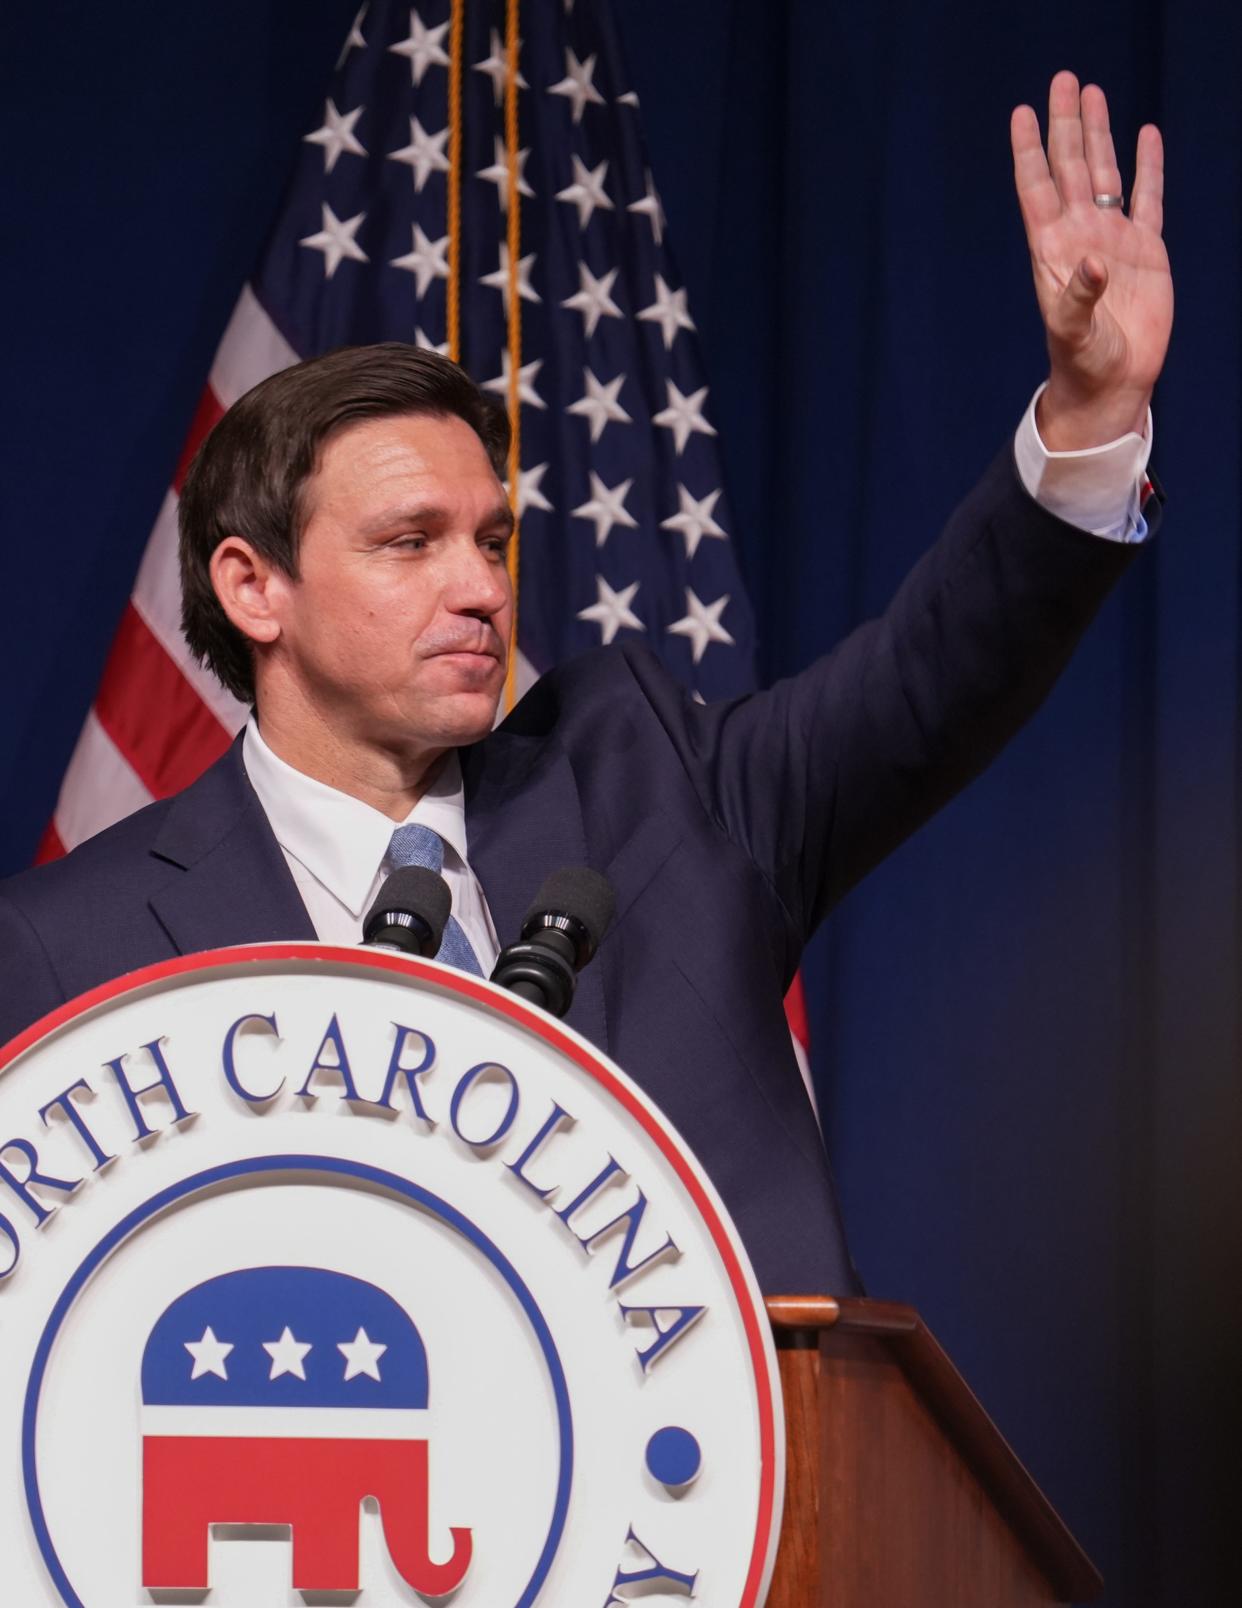 Jun 9, 2023; Greensboro, NC, USA; Hundreds gathered to hear Governor Ron DeSantis speak at the North Carolina Republican Party 2023 State Convention on Friday, June 9. The event came on the heels of another indictment of former President Donald Trump.